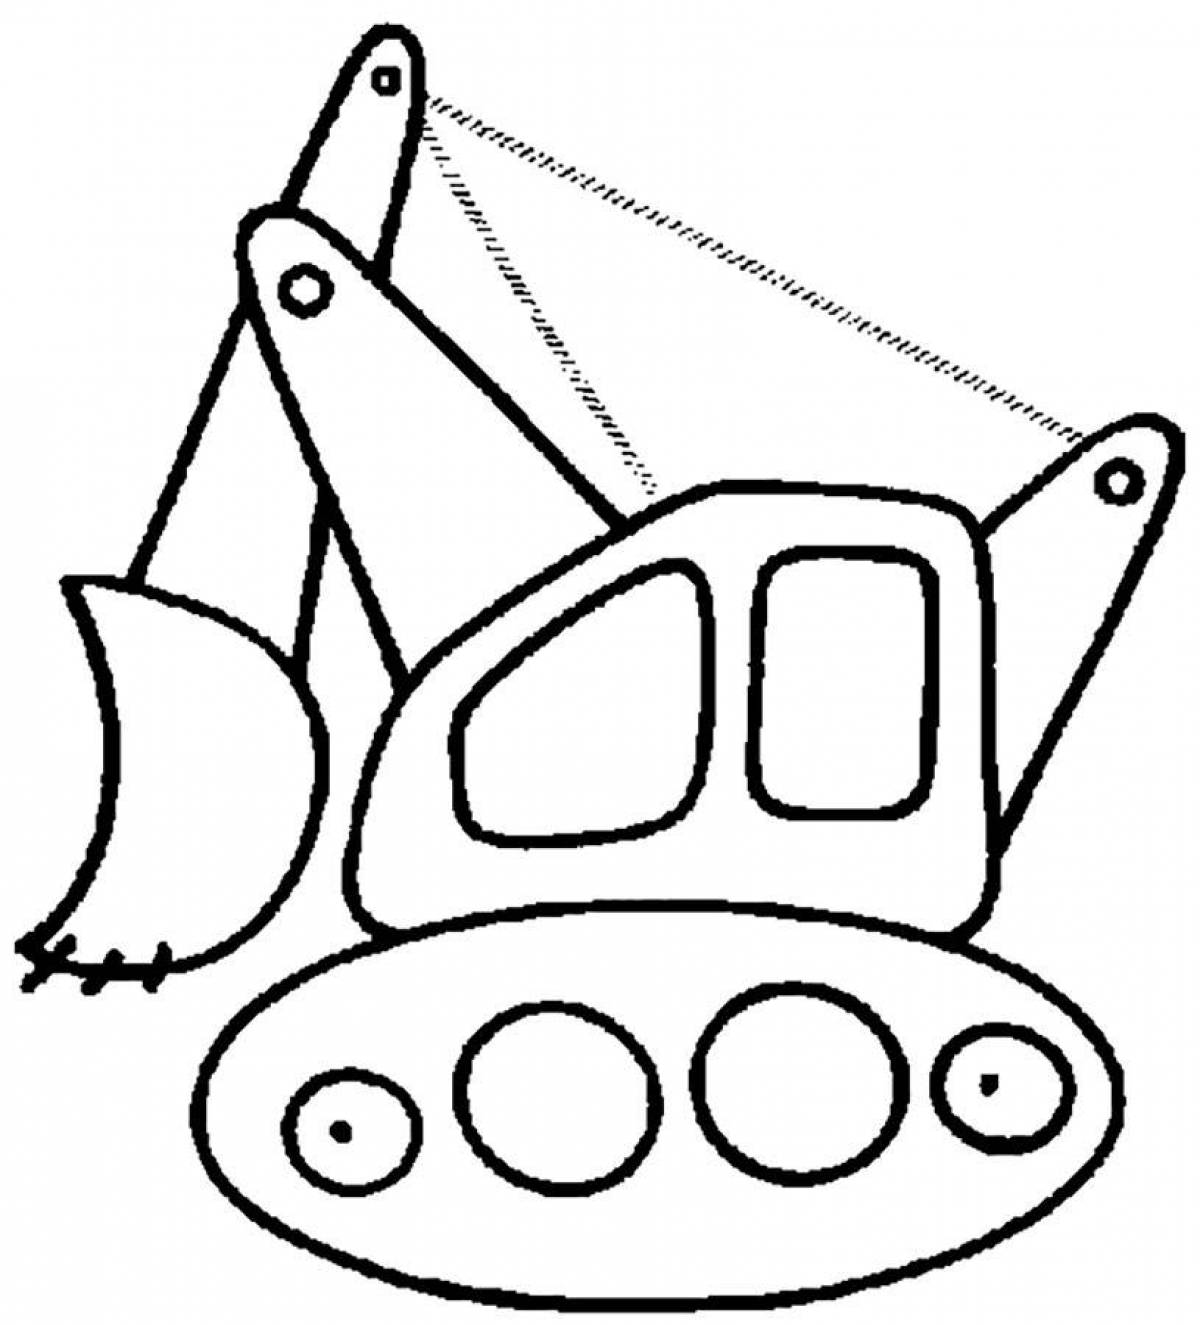 Colorific excavator coloring pages for kids